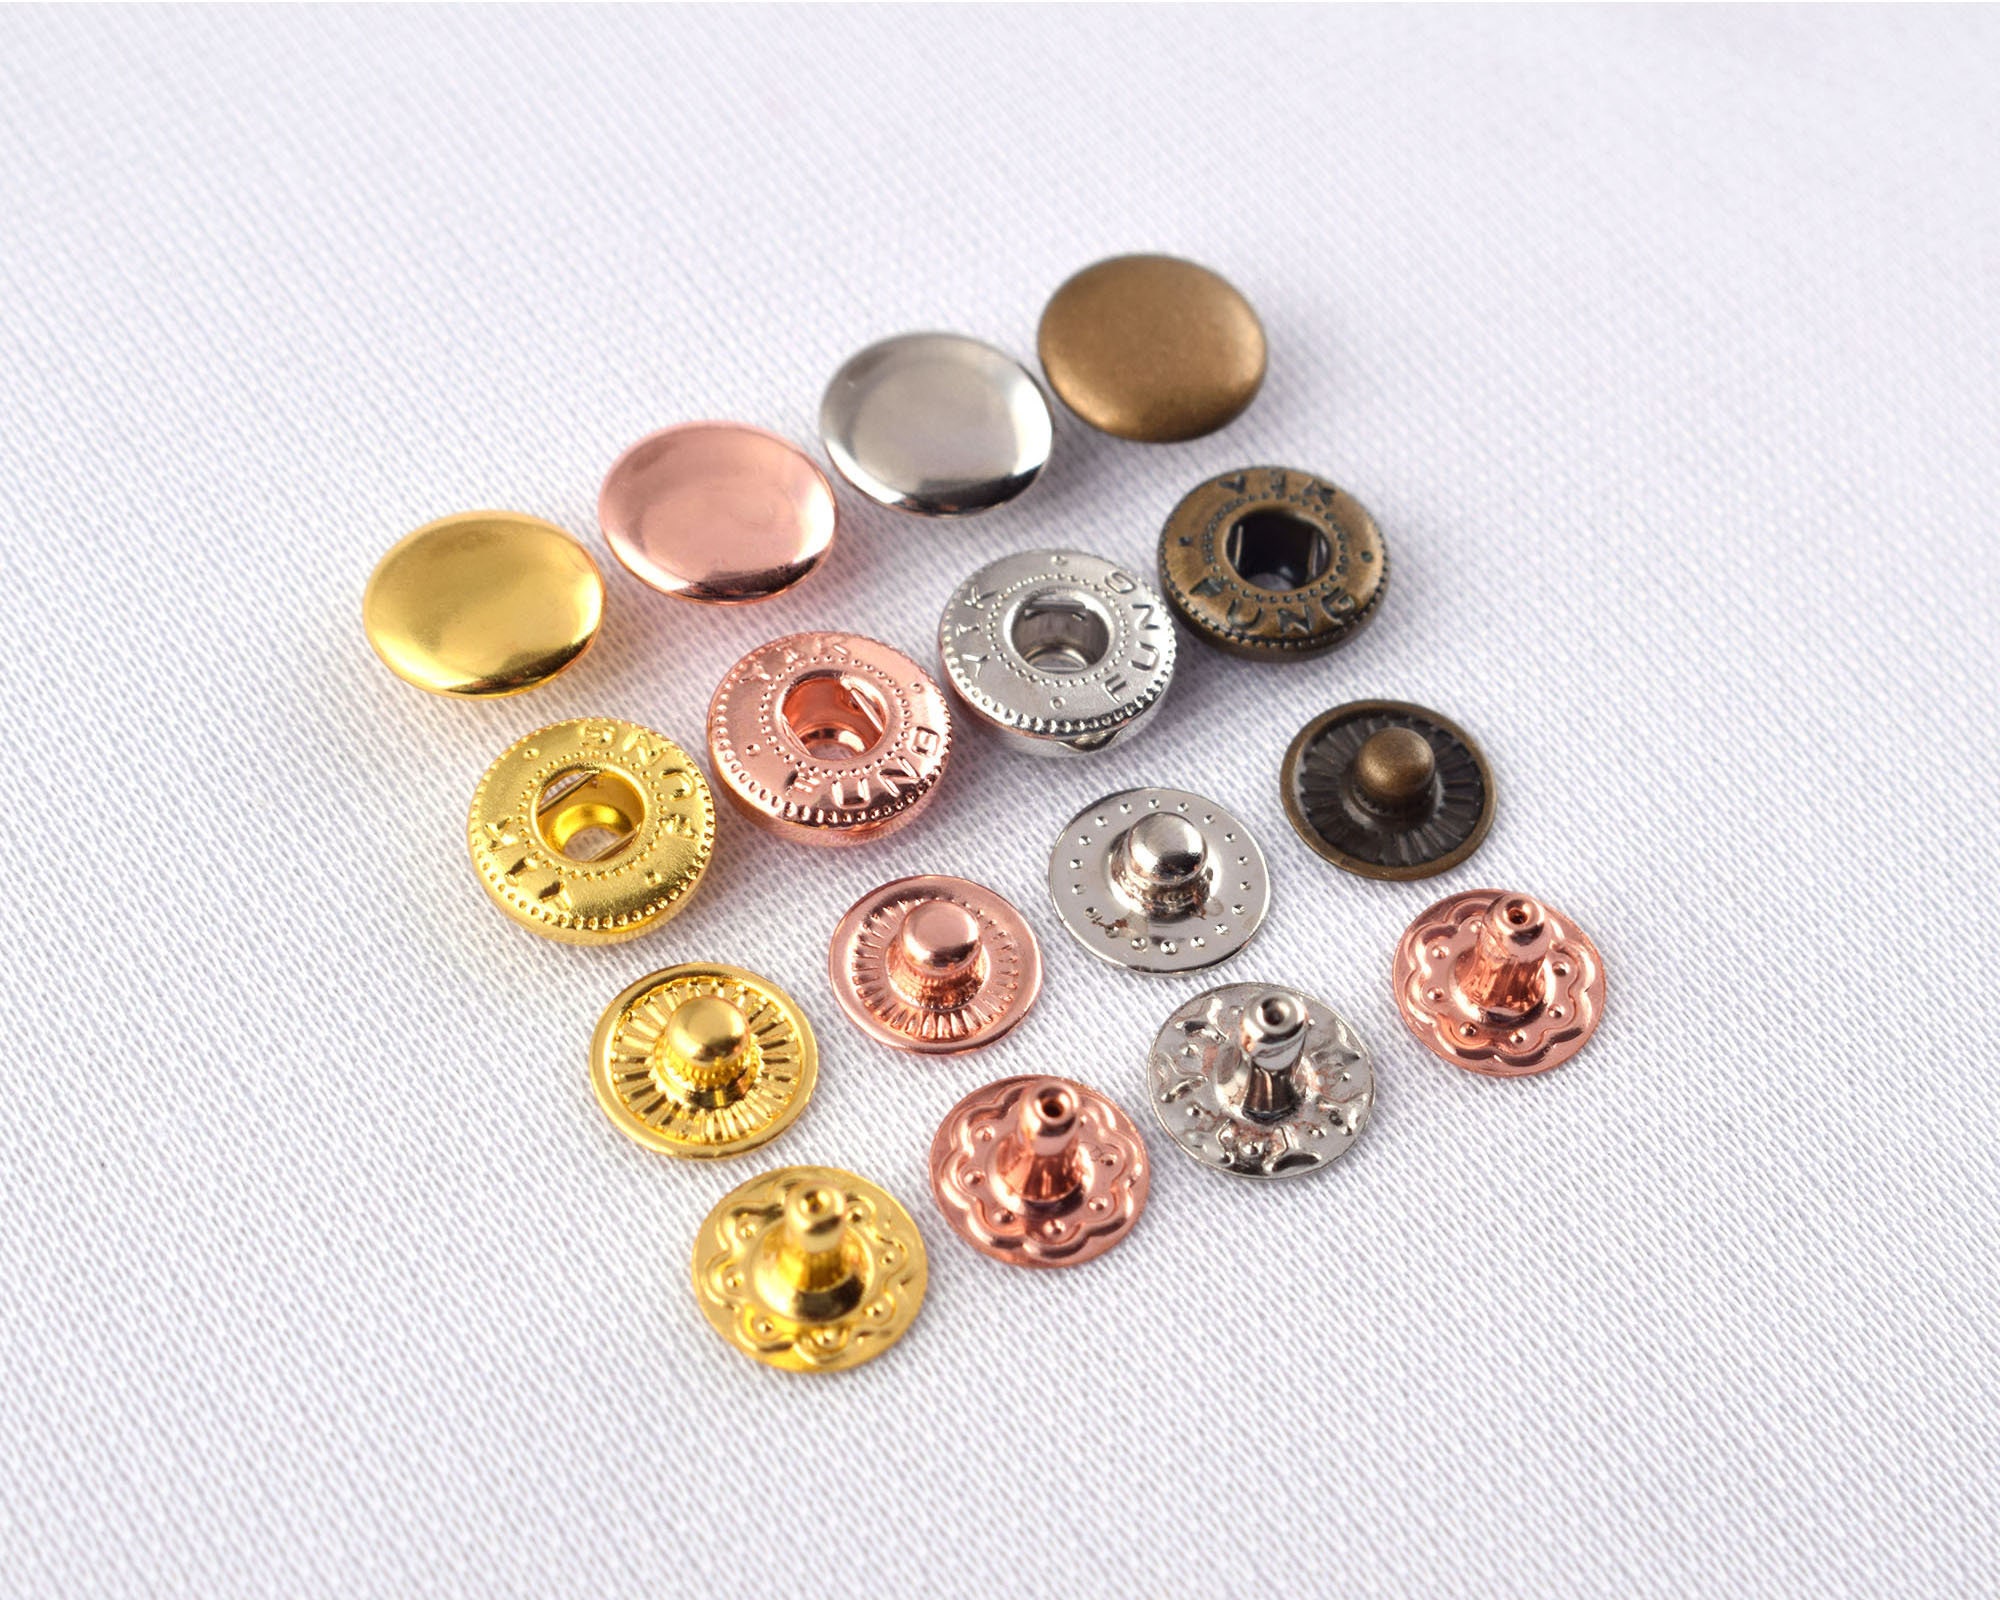 10 mm VT2 Round Metal Fashion Snap Buttons (100 Sets / 700 Sets